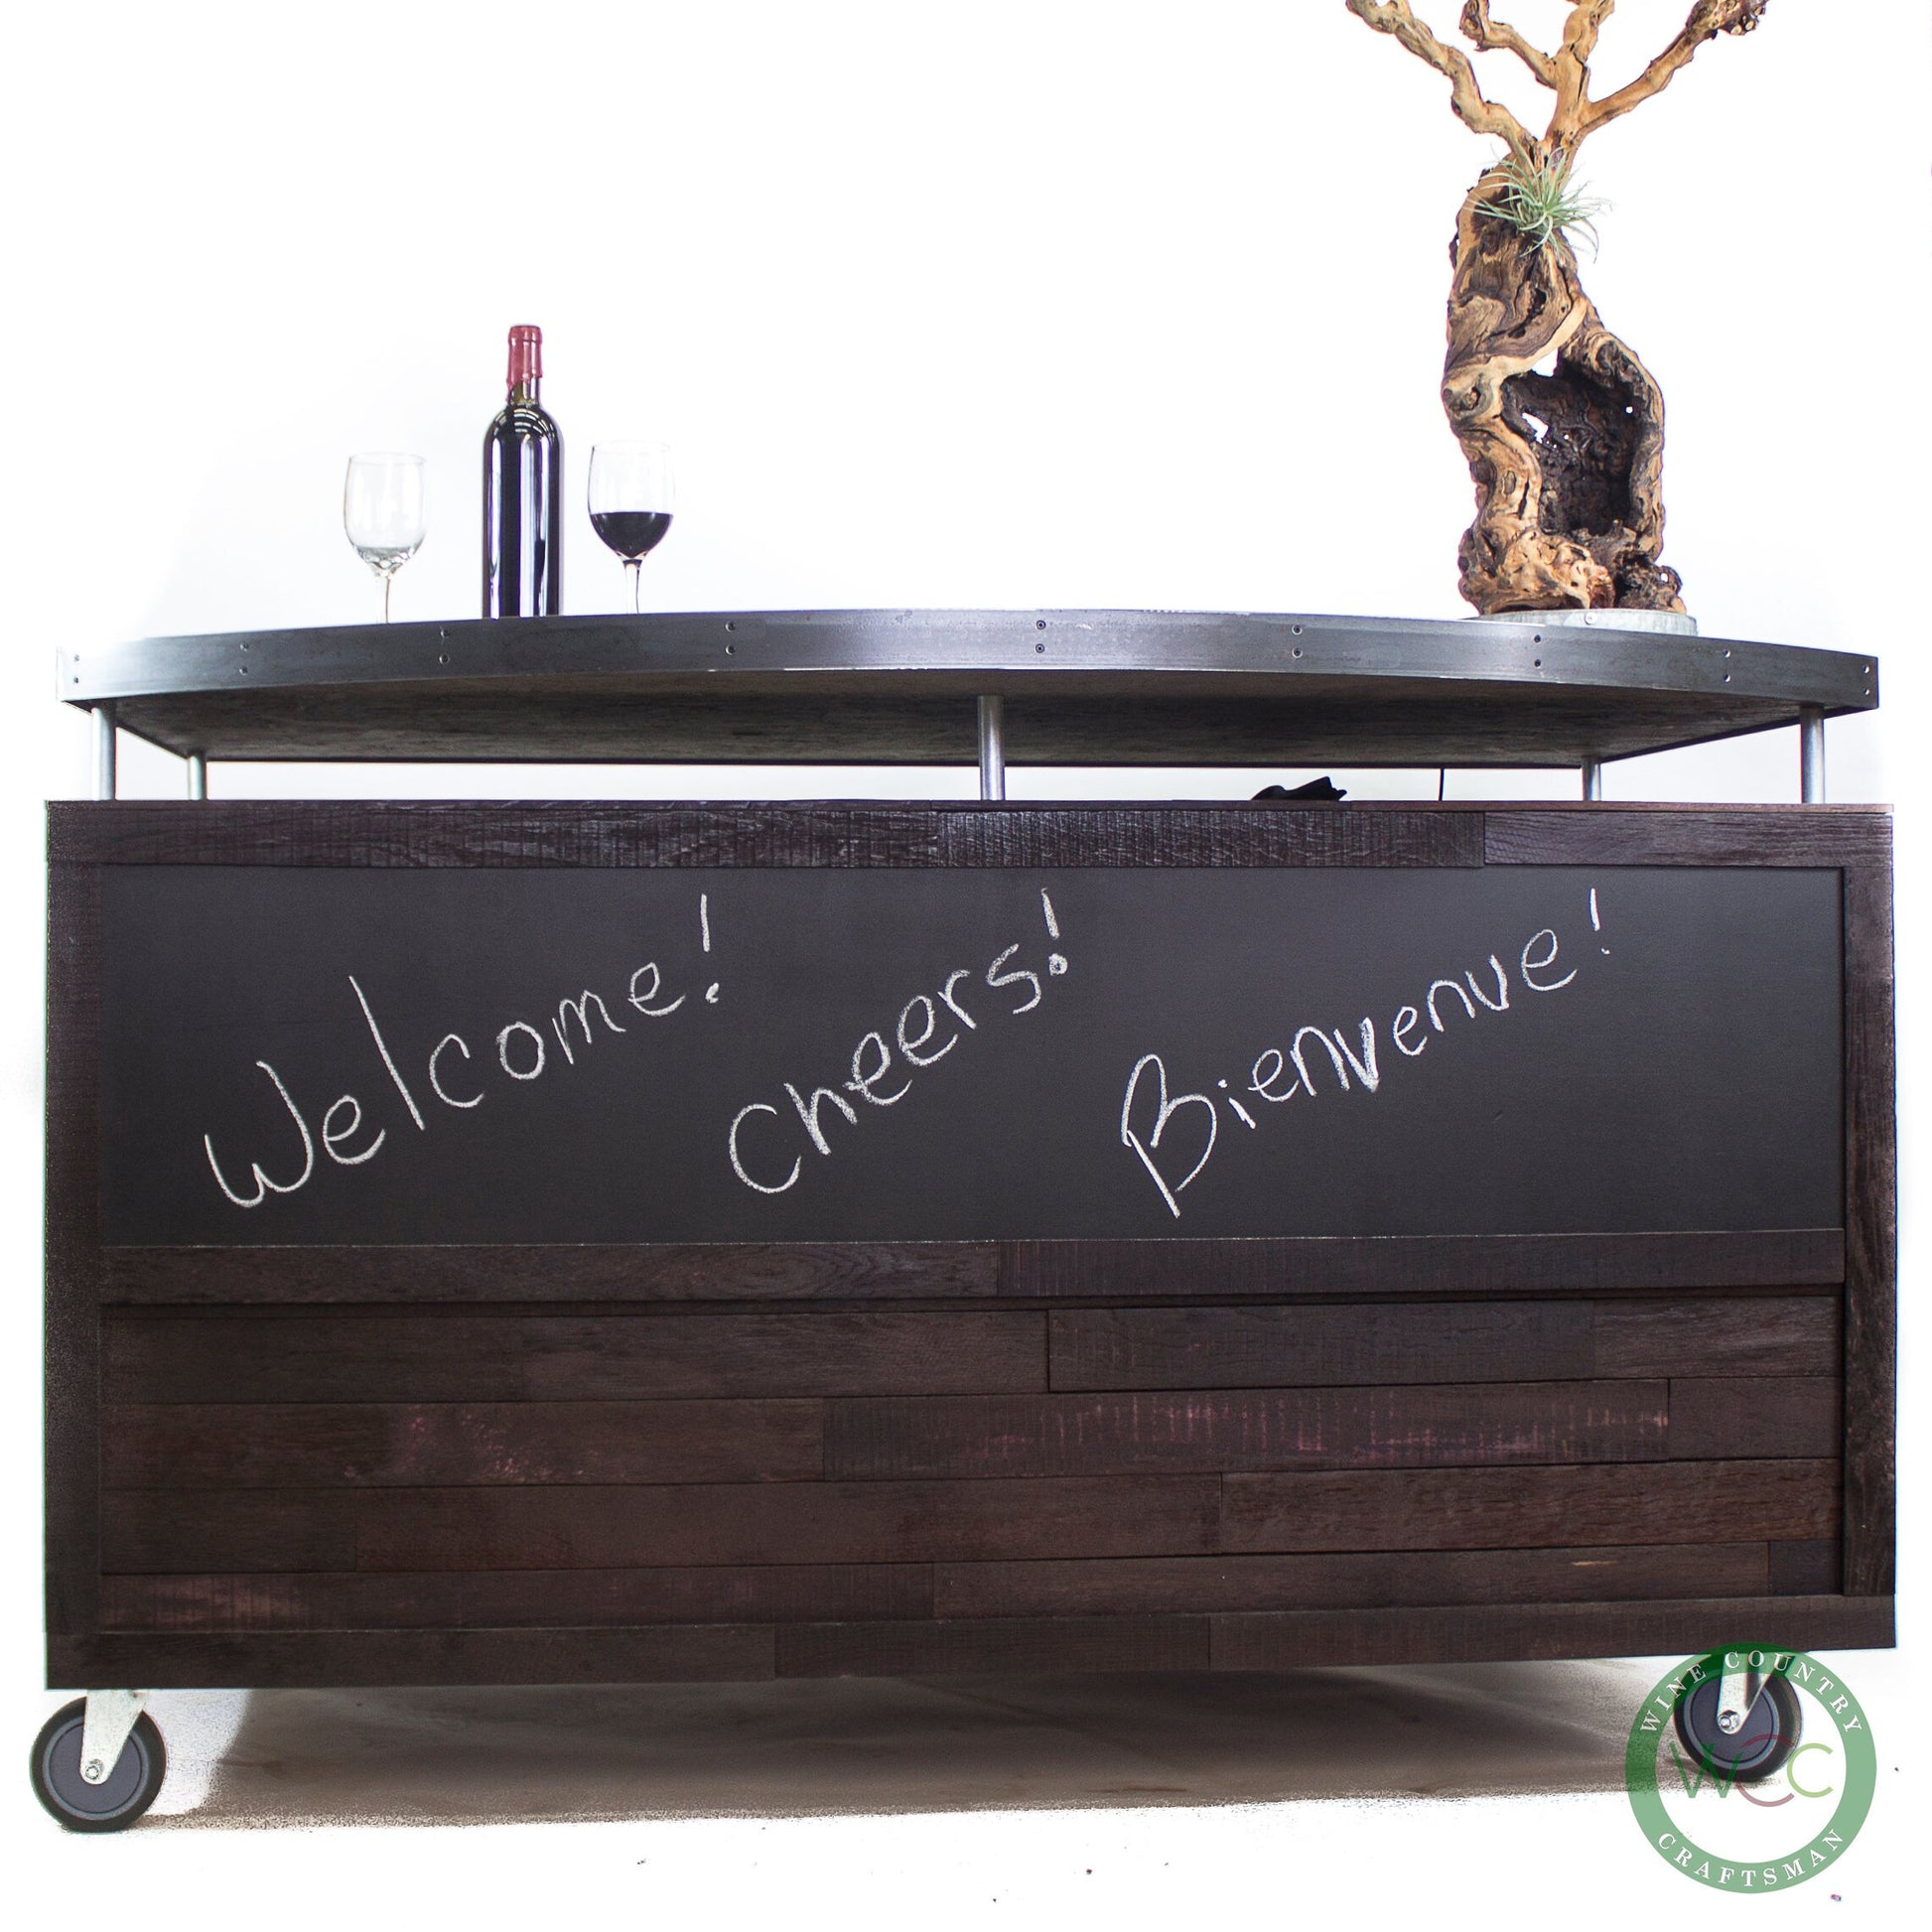 Chalkboard Hostess Stand or Bar - Magnifique - made from reclaimed CA wine barrels with Chalkboard front. 100% Recycled!